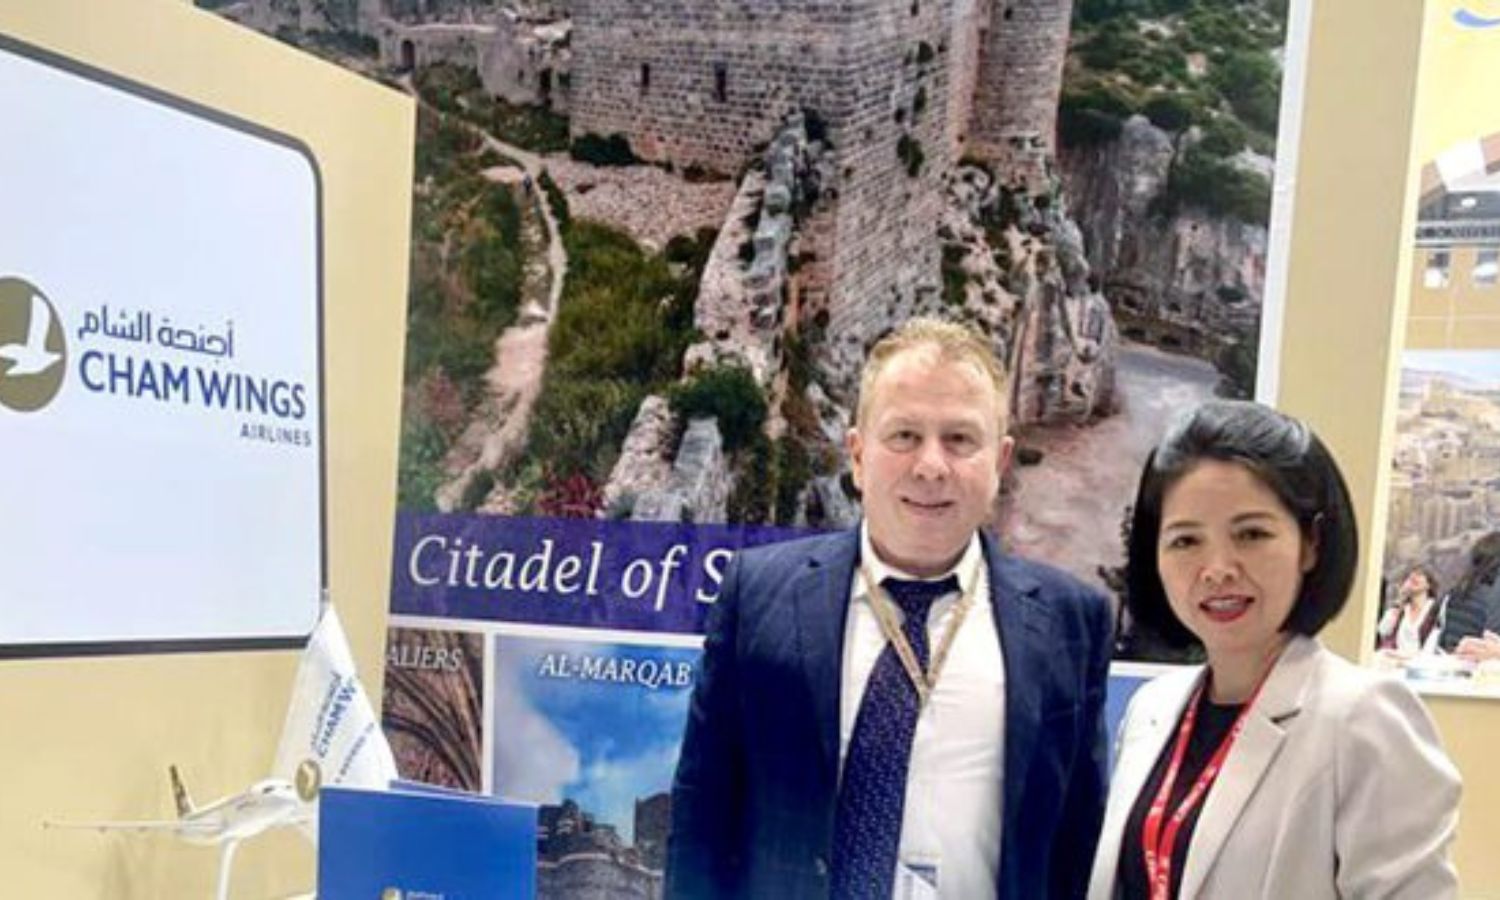 Syrian private airlines company “Cham Wings” participated in an international tourism fair held in Spain - January 25 (SANA)